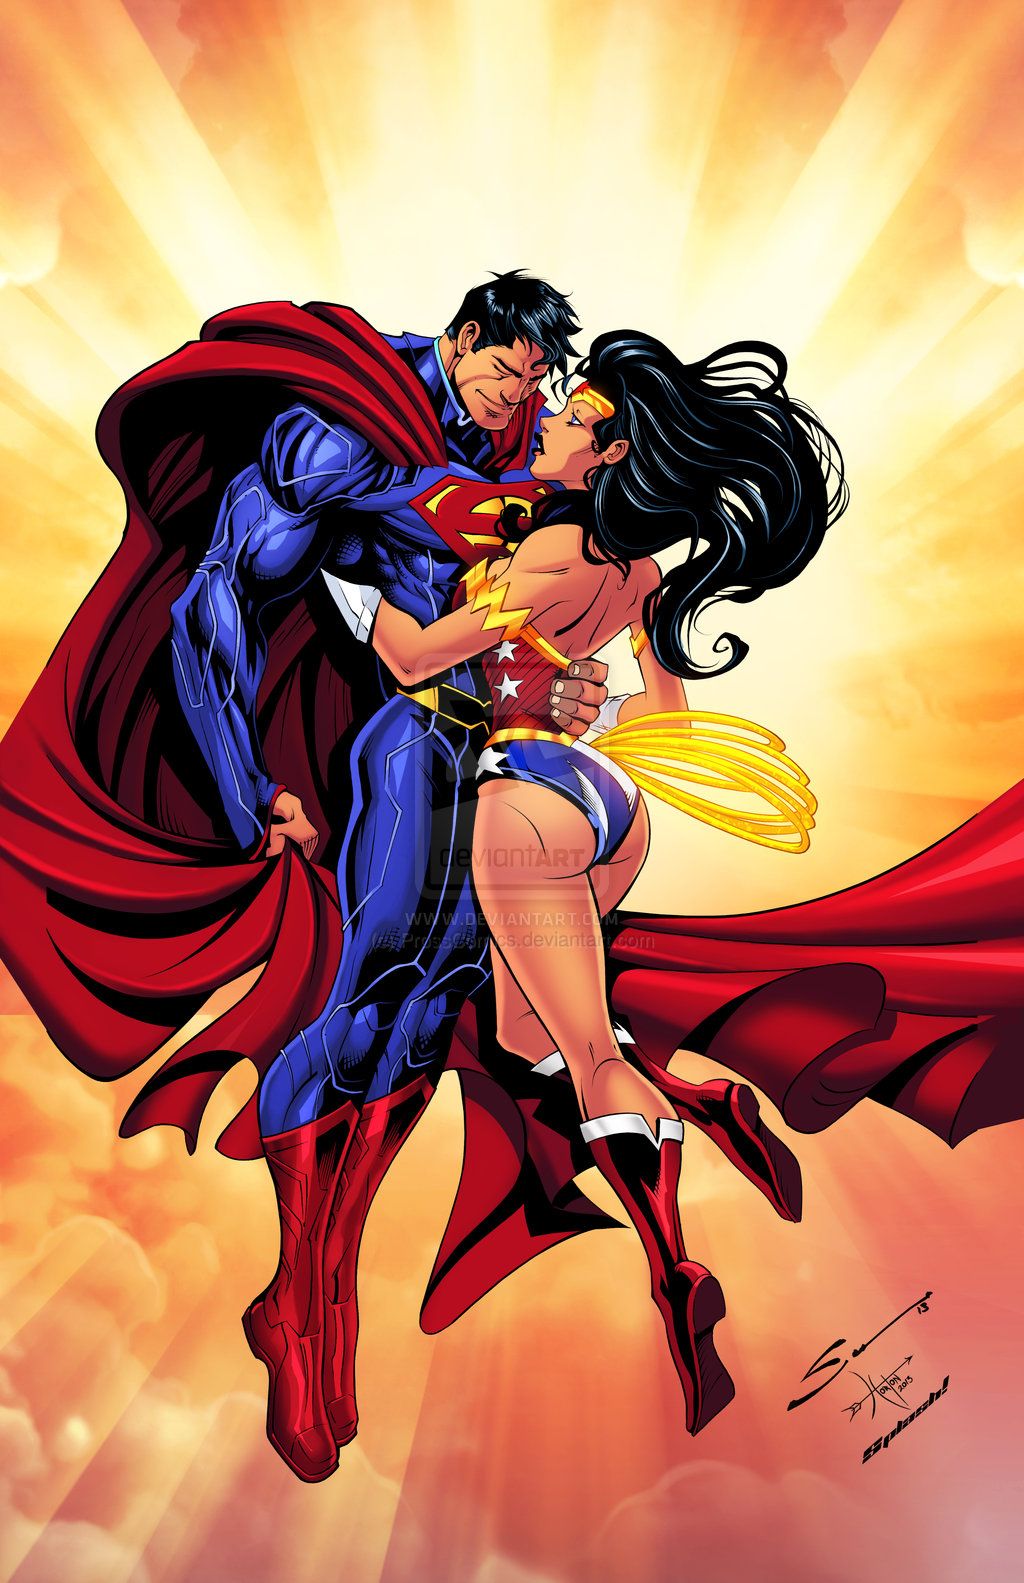 Superman and Superwoman Wallpaper Free Superman and Superwoman Background